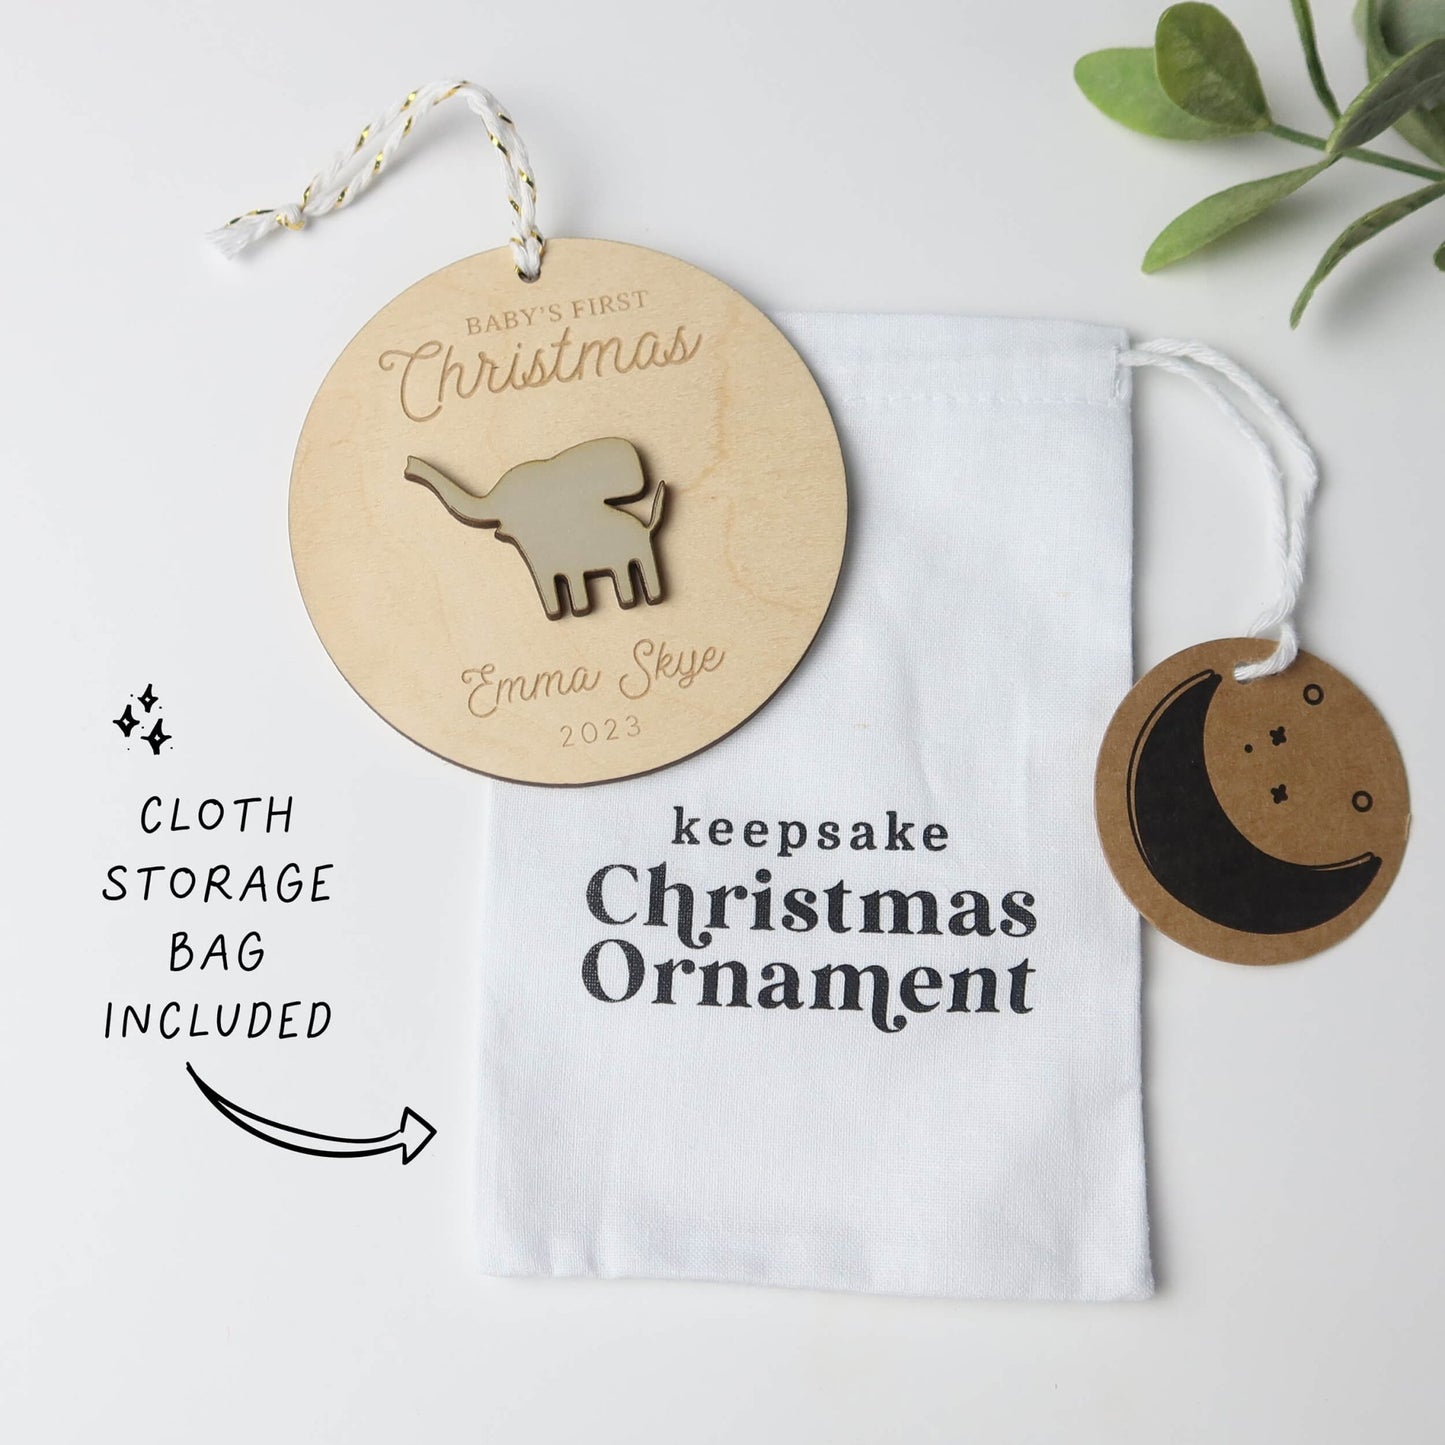 Elephant Baby's First Christmas Ornament Personalized - Holiday Ornaments - Moon Rock Prints